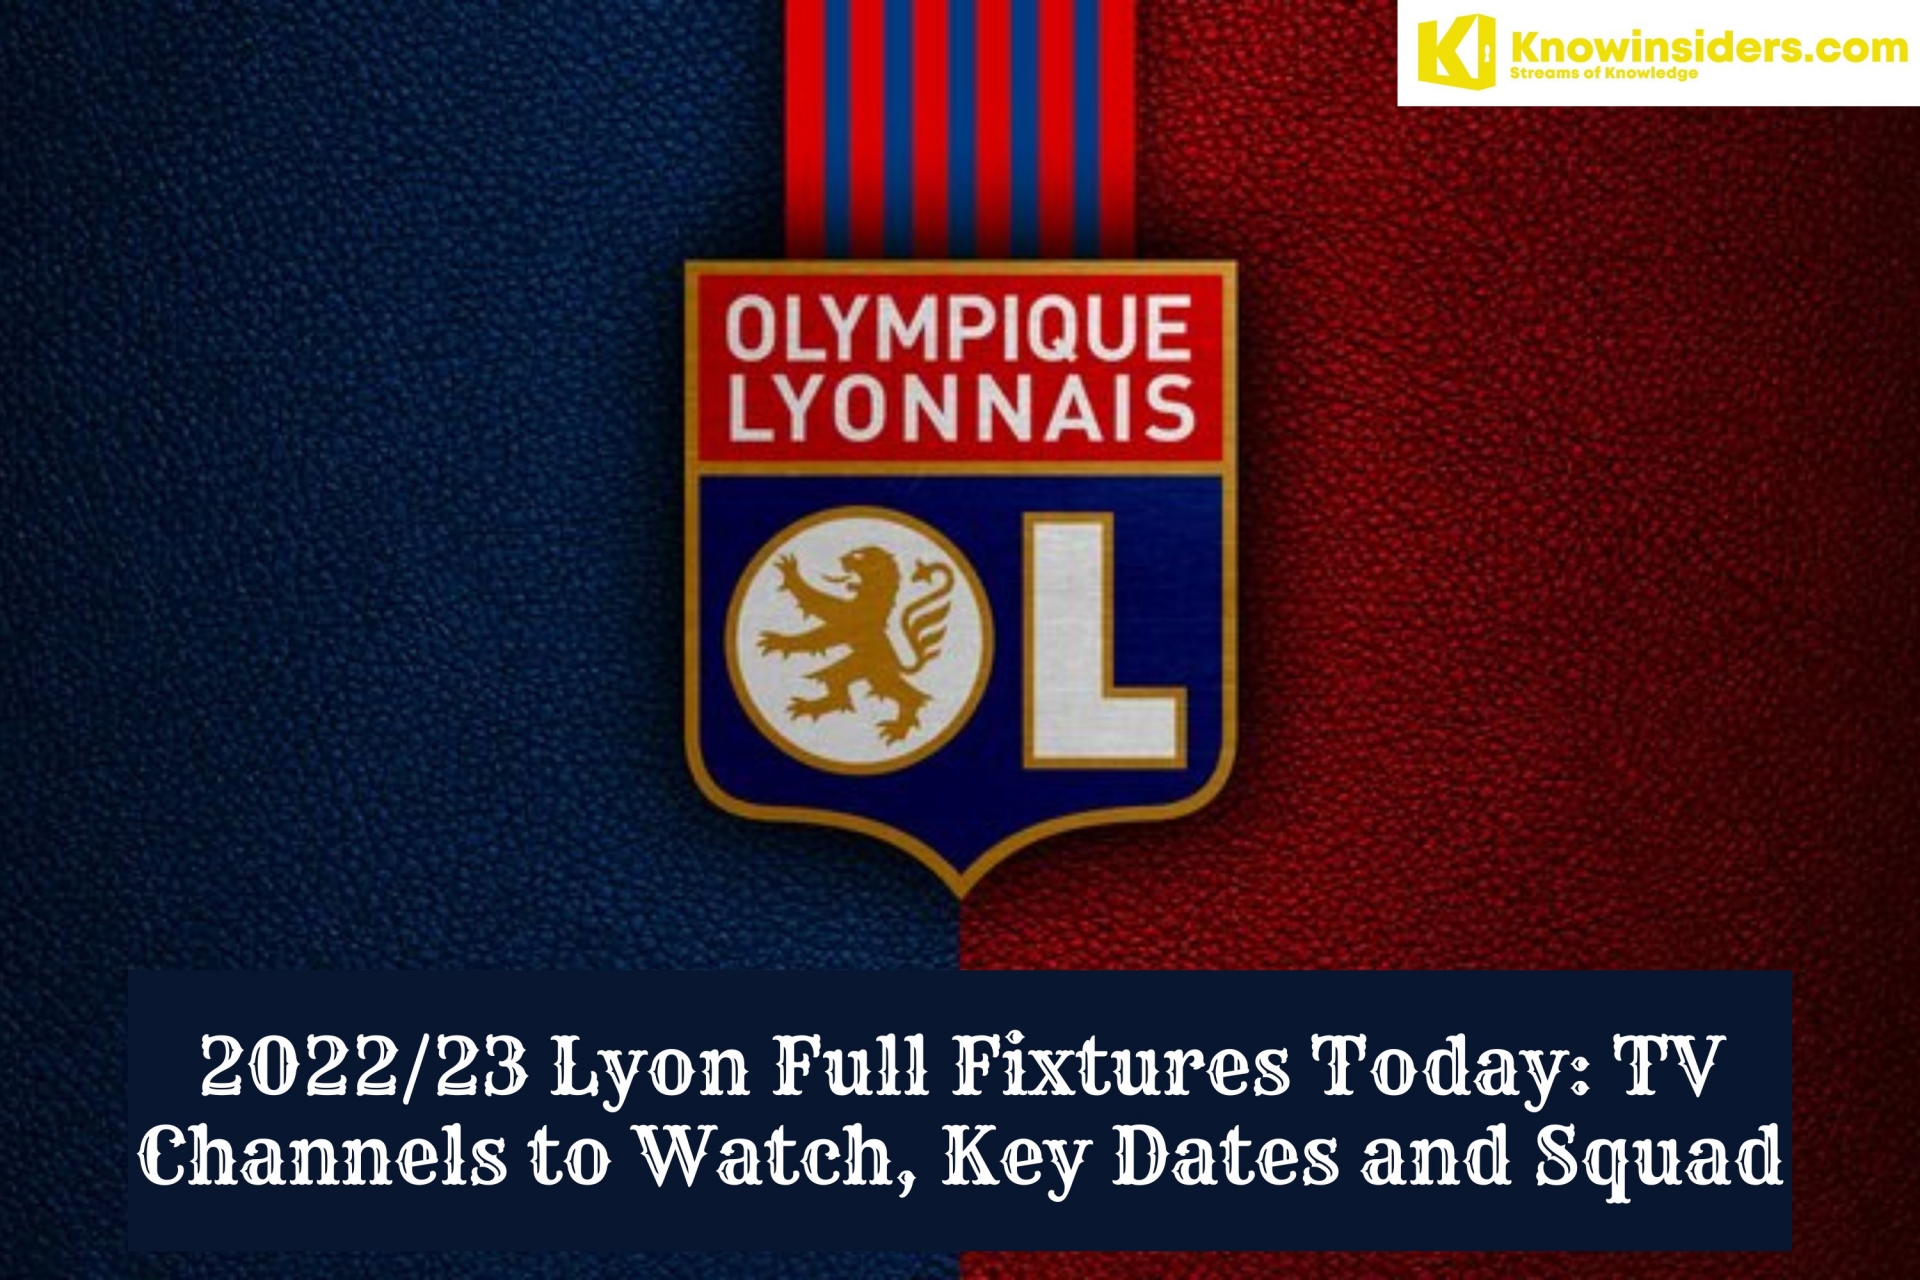 2022/23 Lyon Full Fixtures Today: TV Channels, Key Dates and Squad